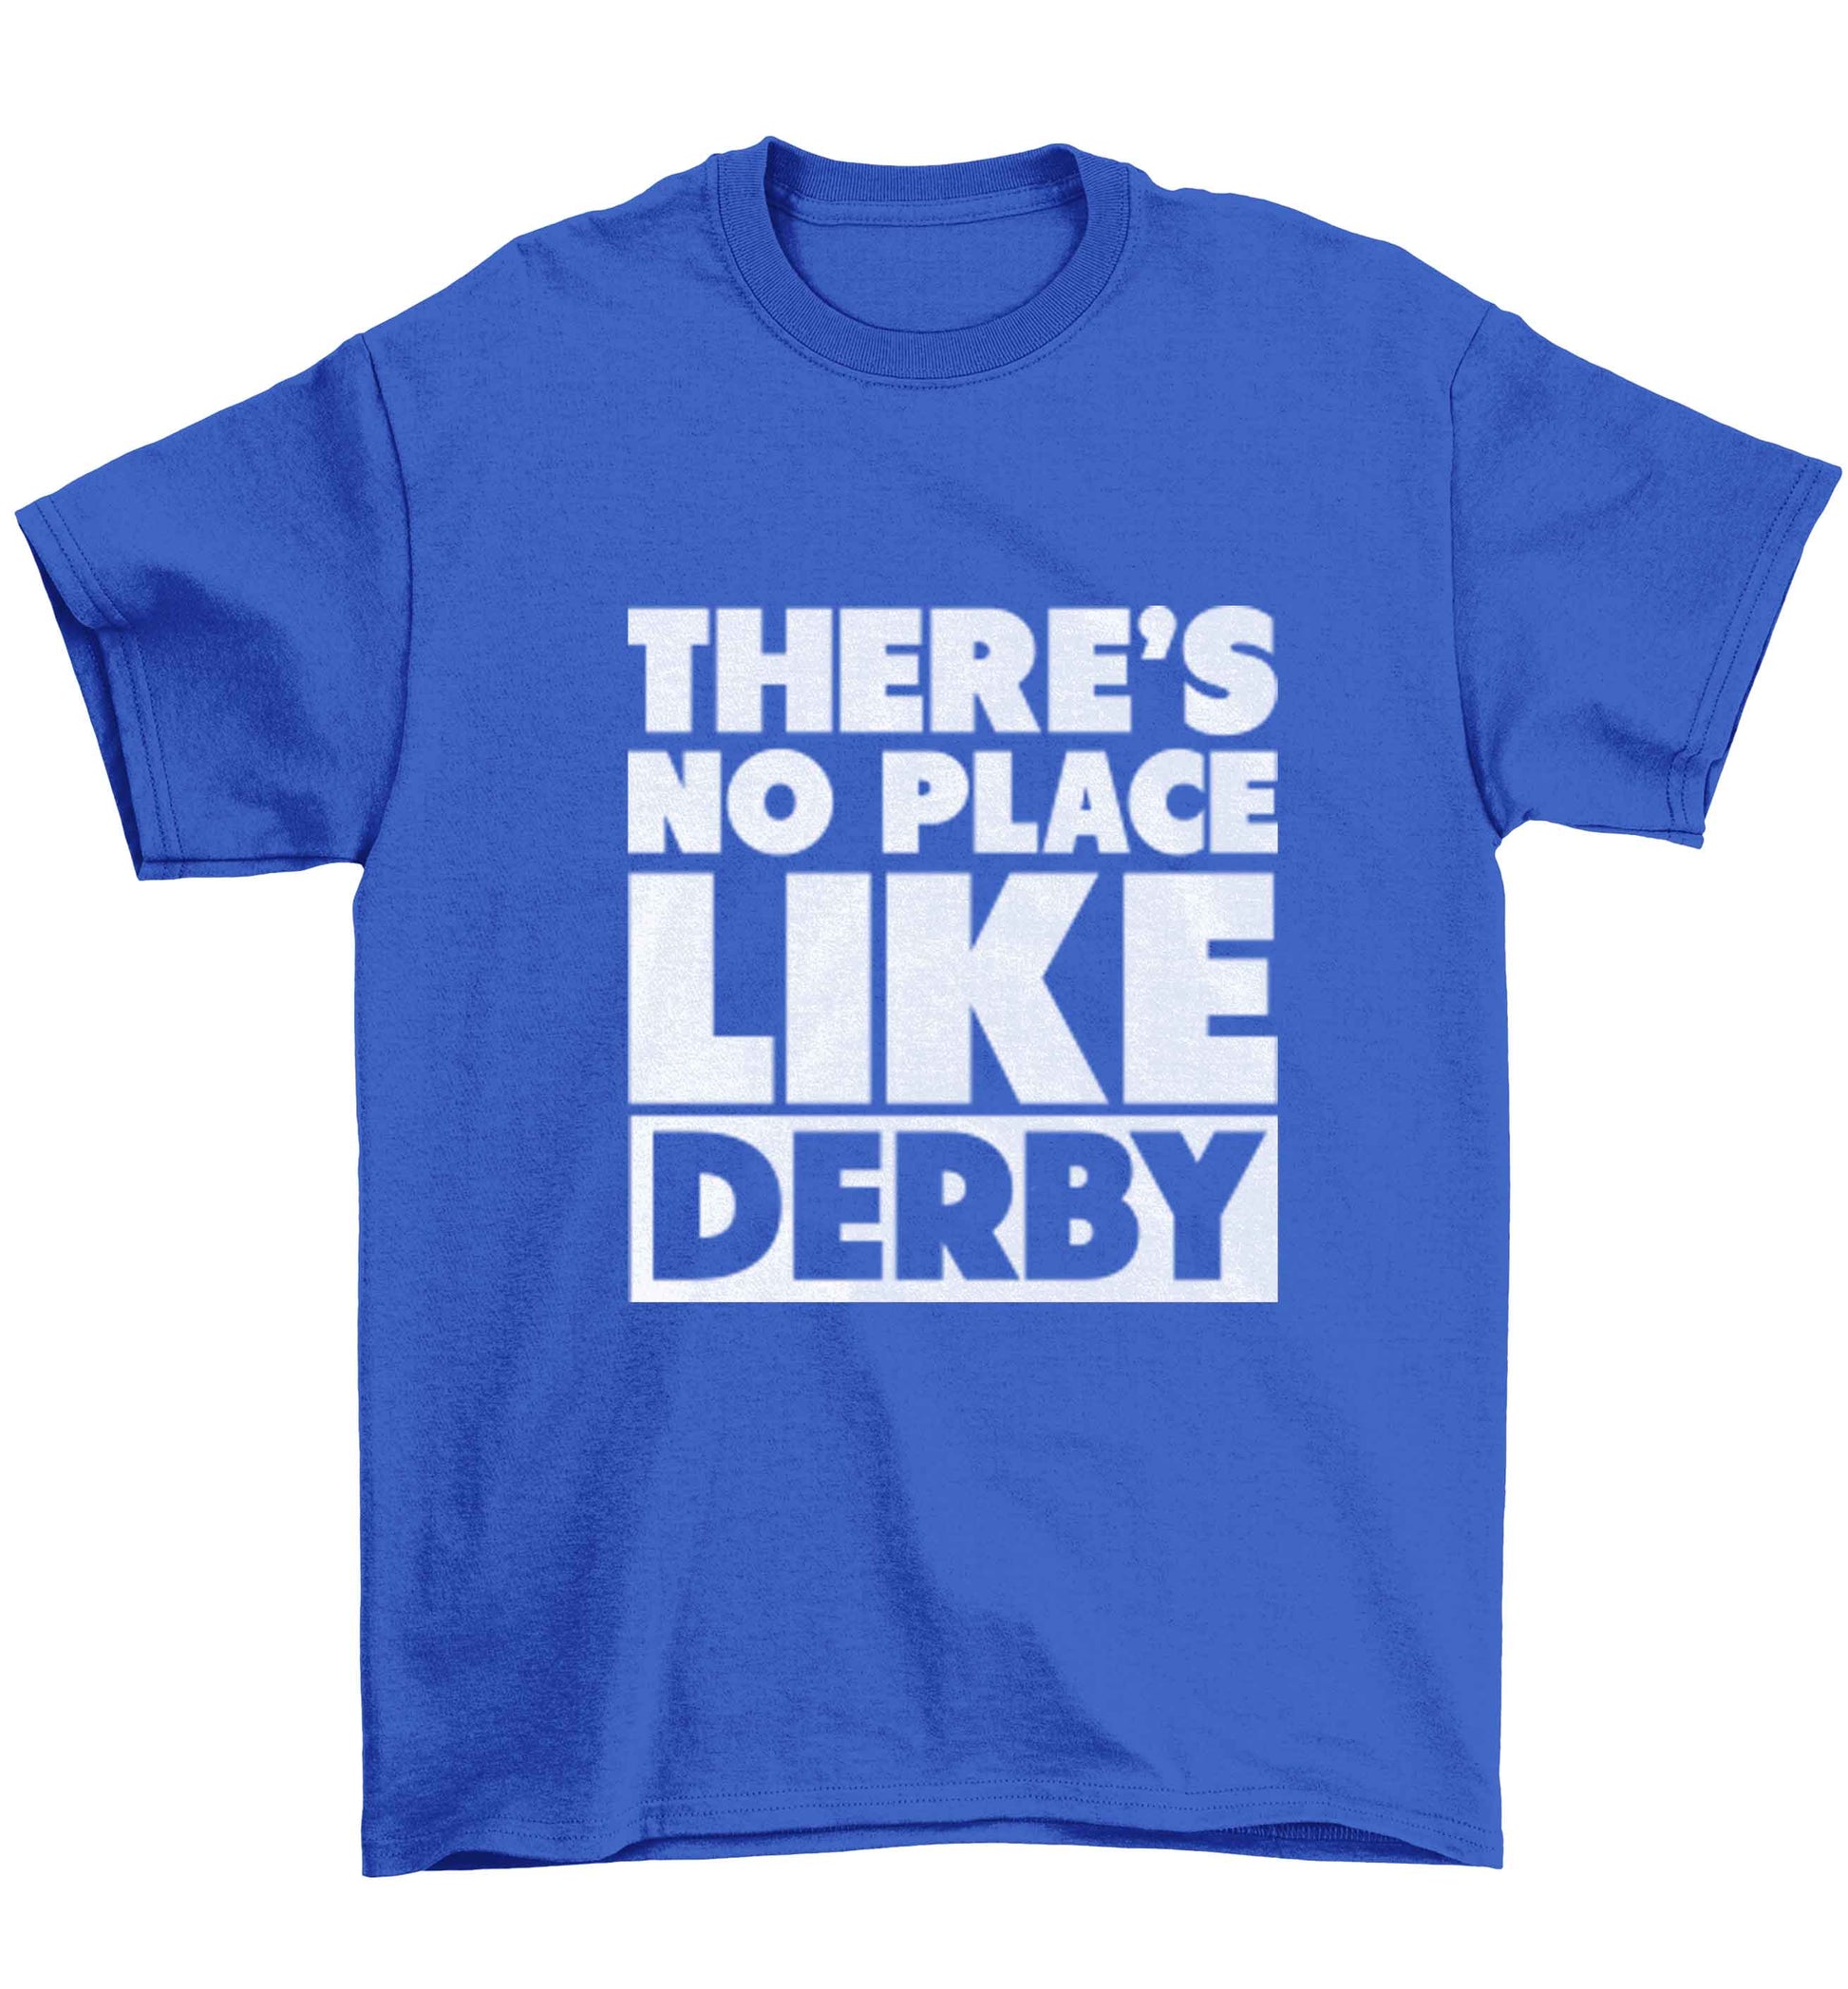 There's no place like Derby Children's blue Tshirt 12-13 Years